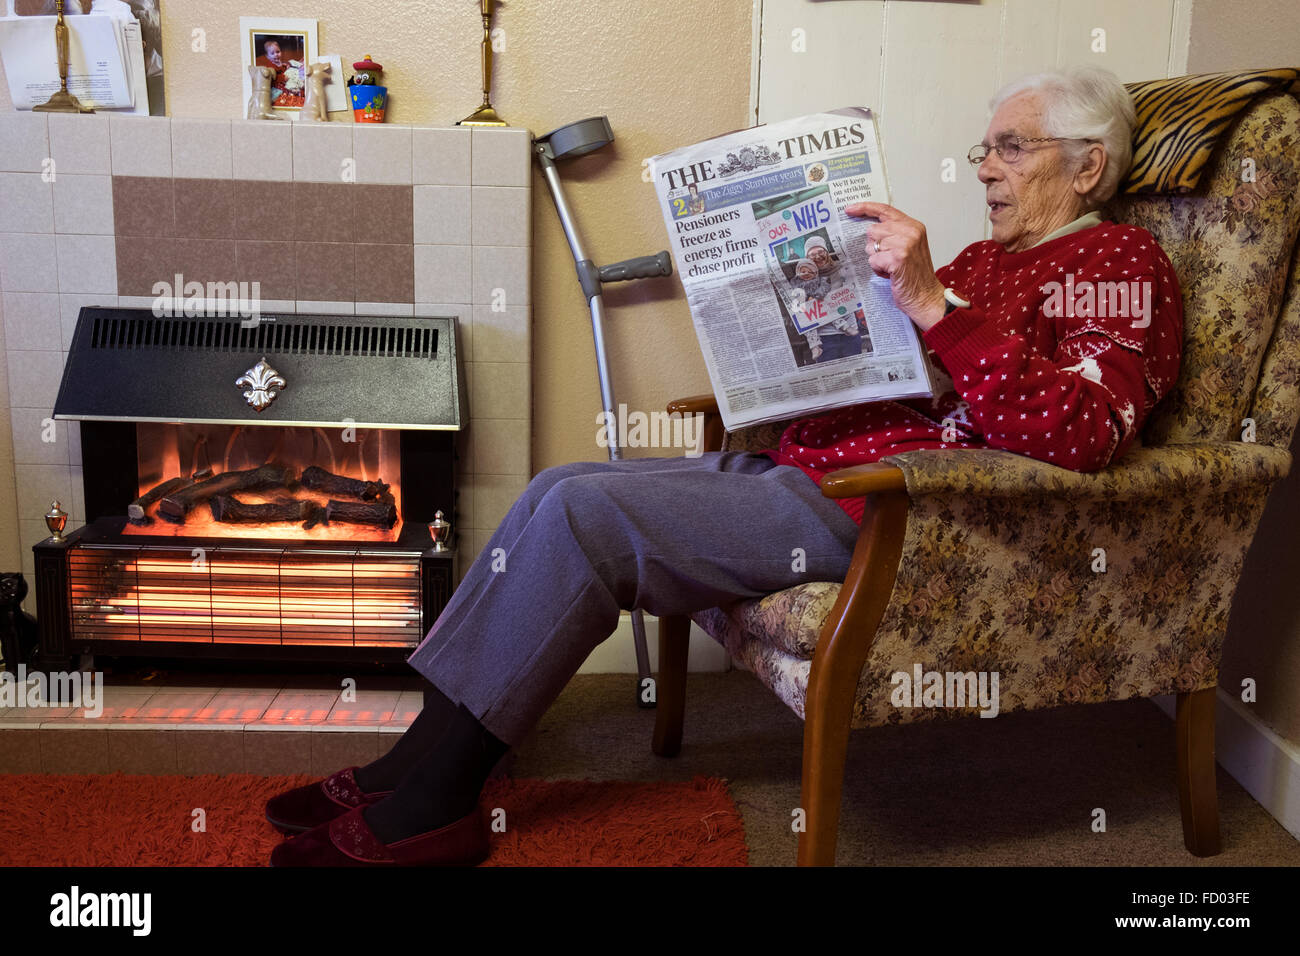 Old age pensioner at home reading The Times newspaper with the headline 'Pensioners freeze as energy firms chase profit' Stock Photo